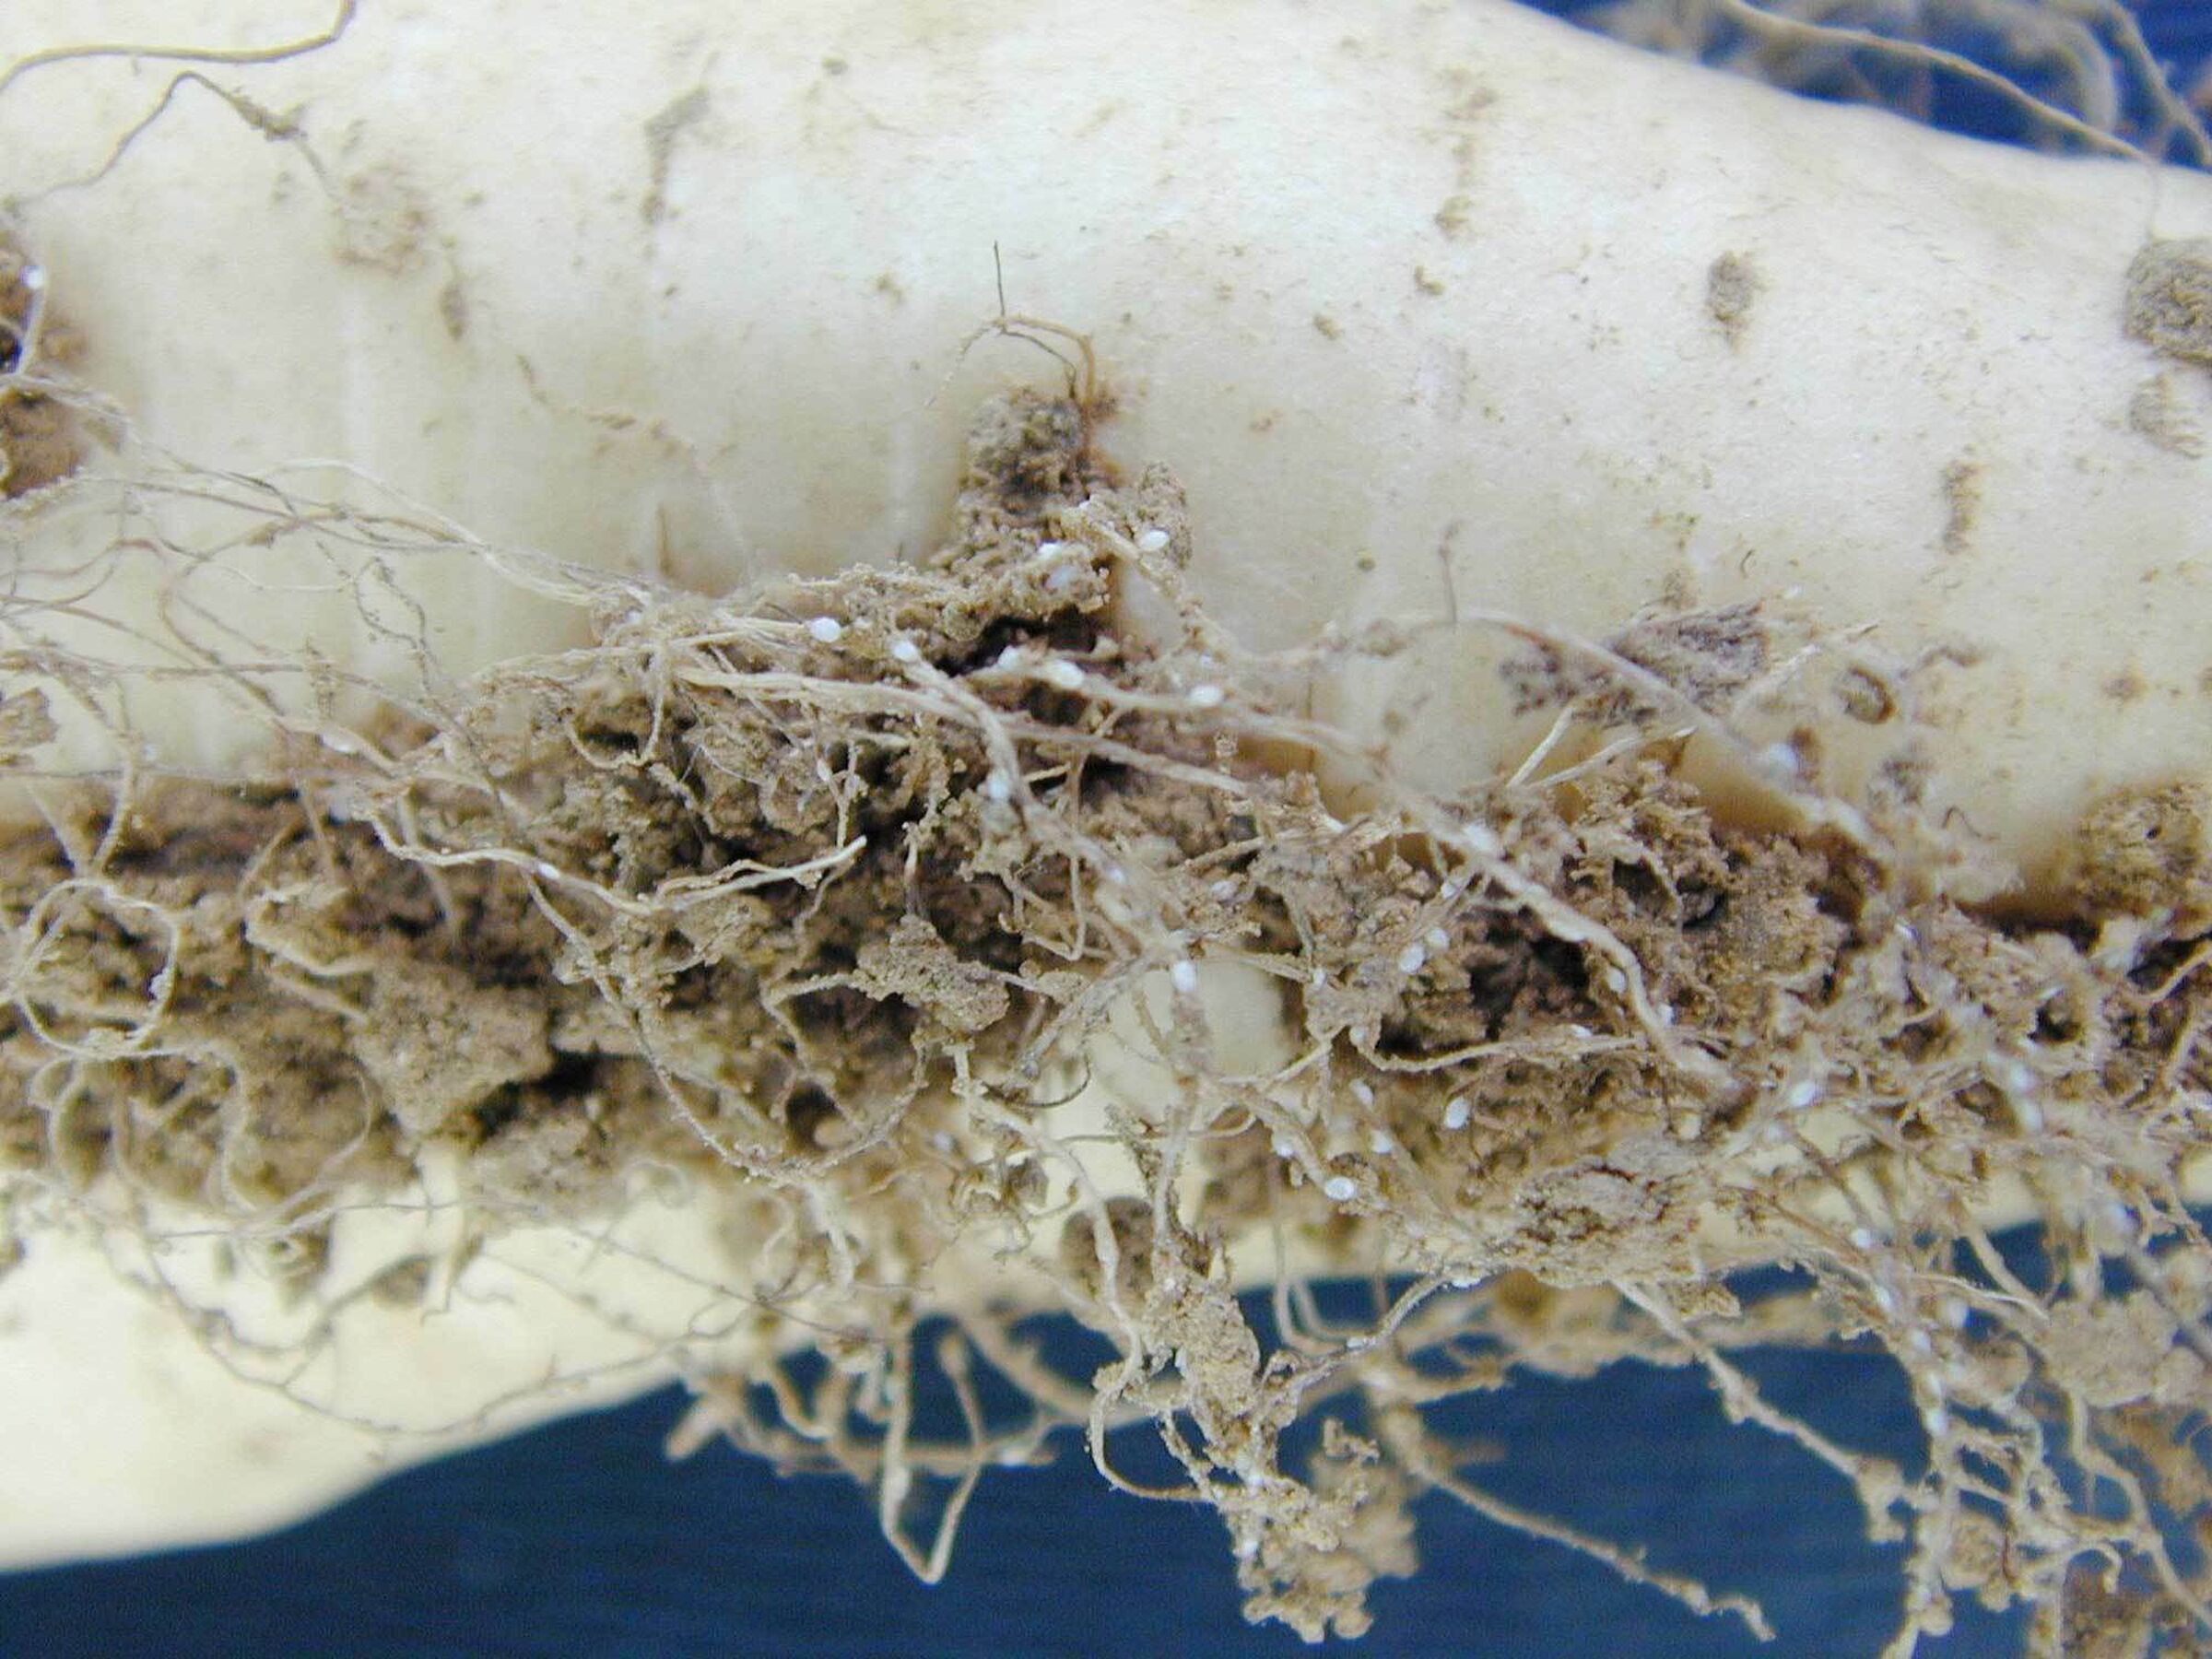 SESVanderHave - sugar beet pests and diseases - white beet cyst nematodes in the root hairs of a sugar beet